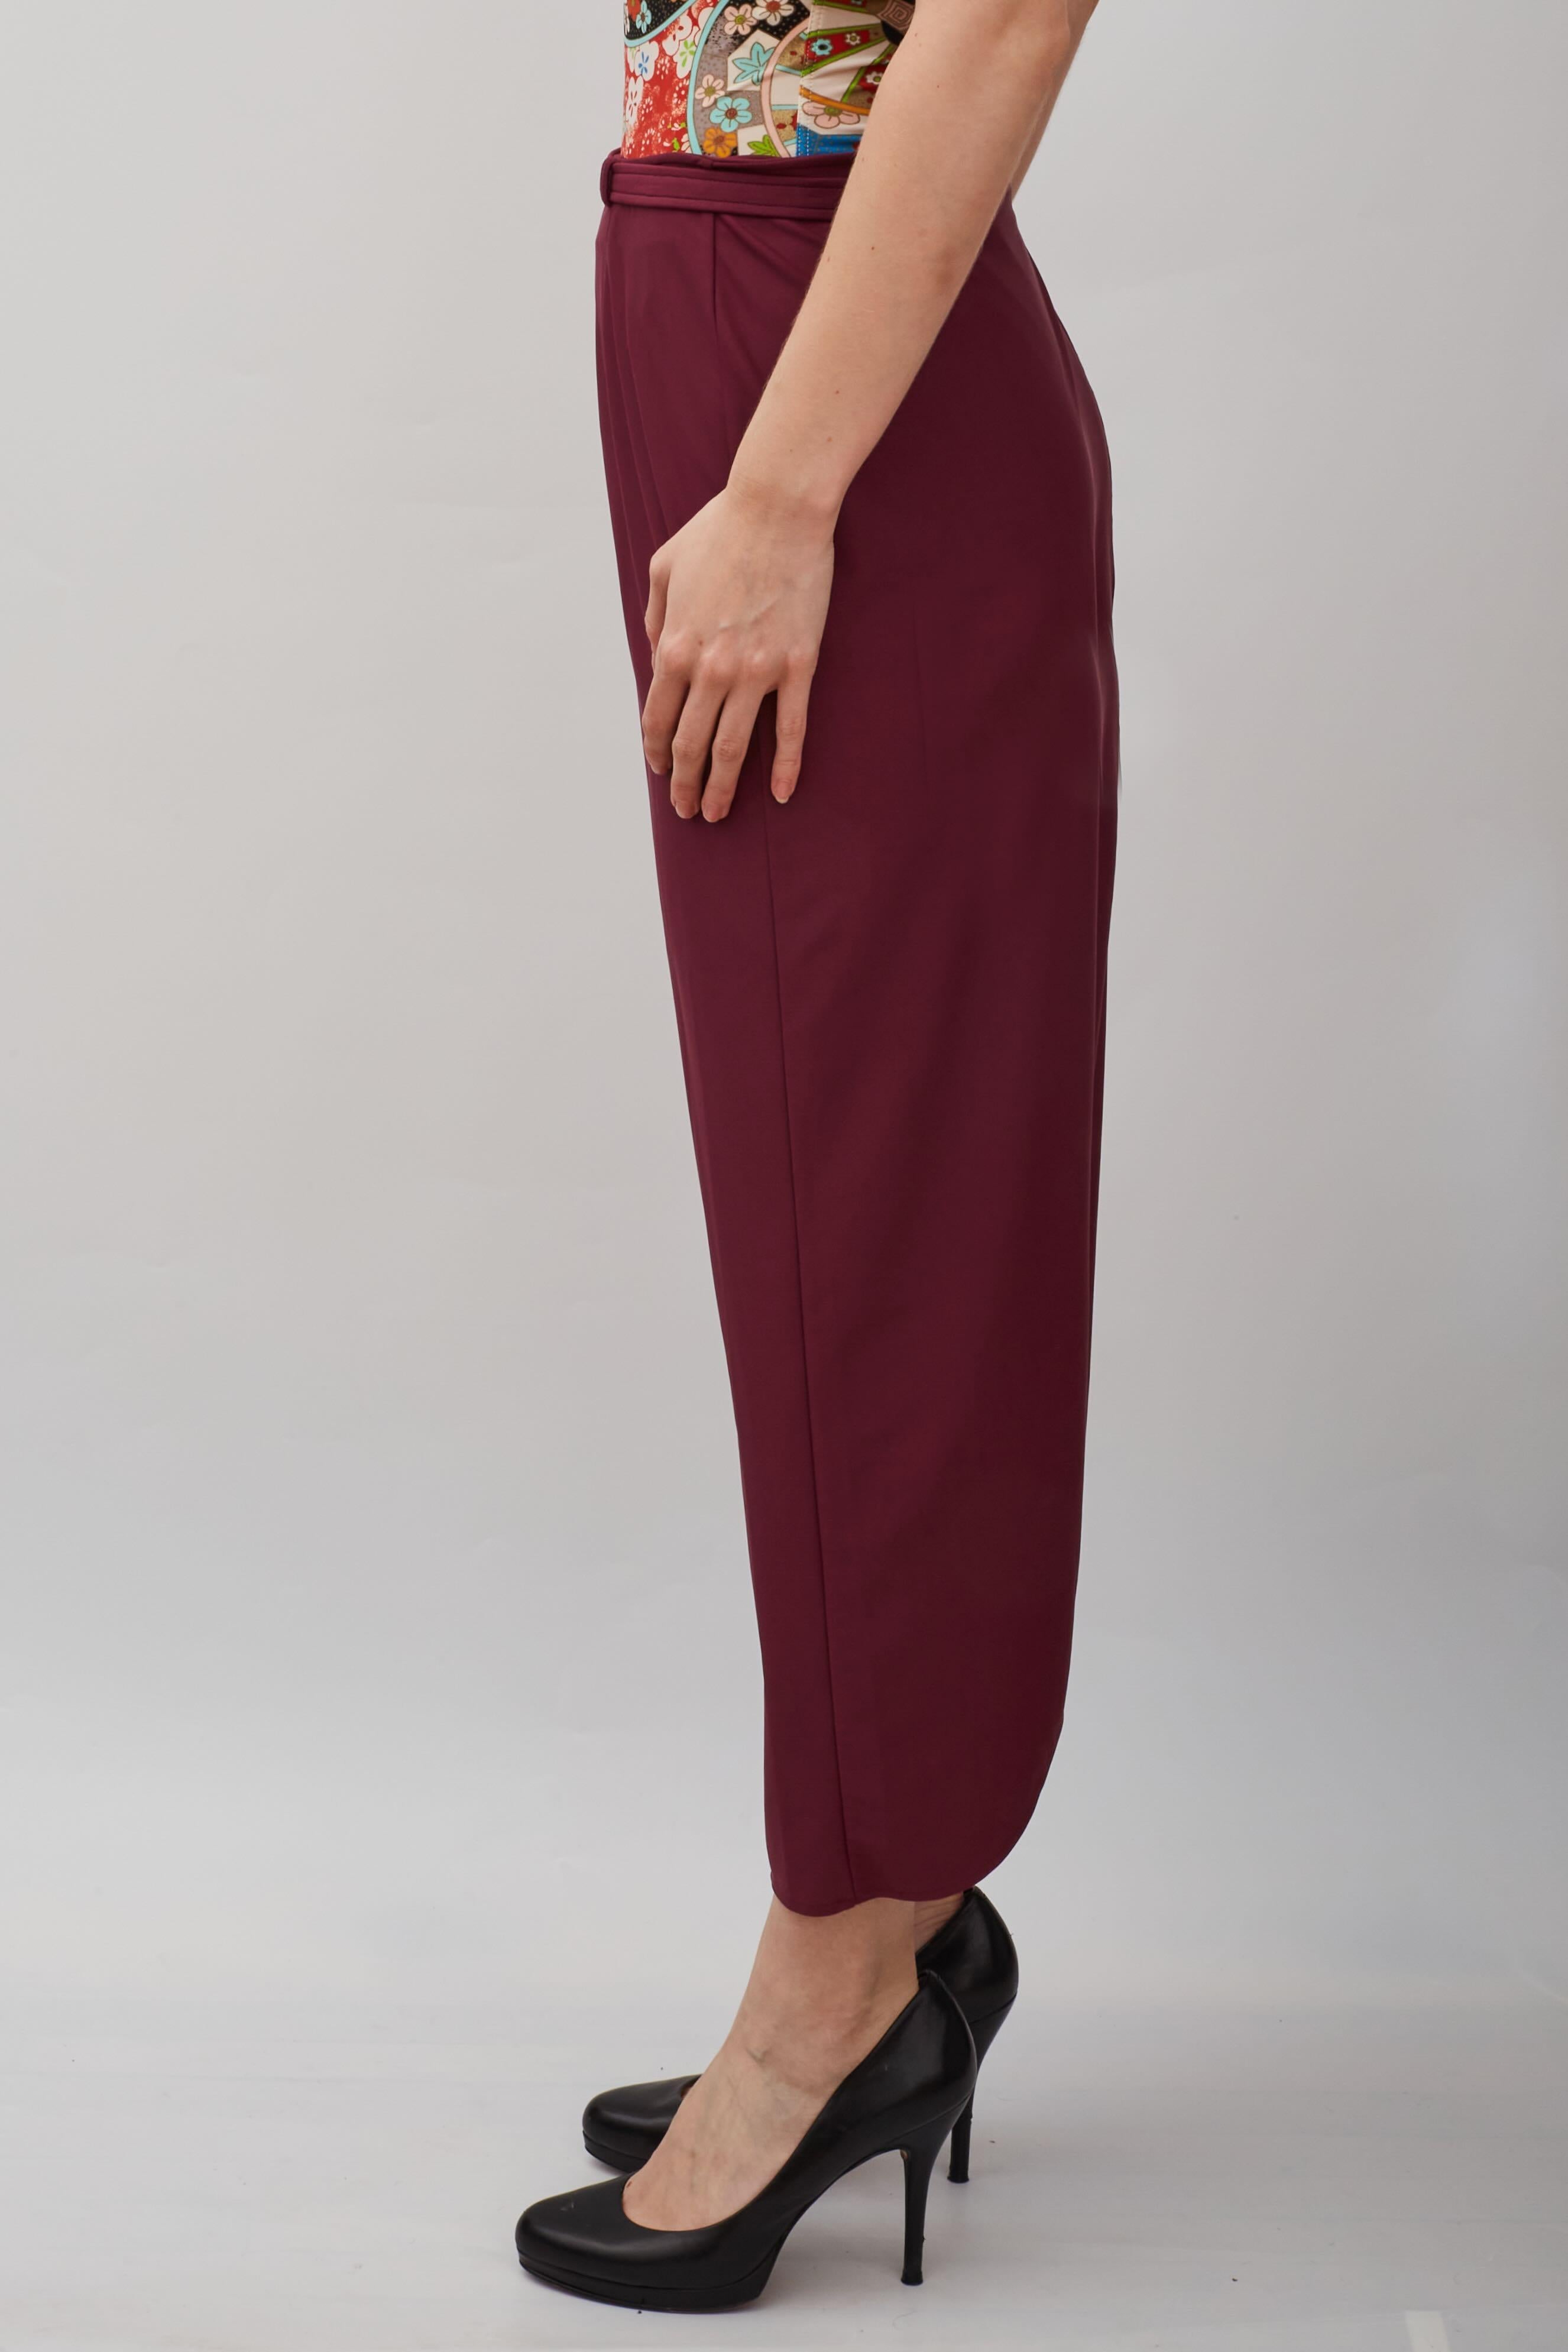 Red Dior Vintage Midi Belted Nylon Burgundy Bordeaux Skirt (US4  Small) For Sale